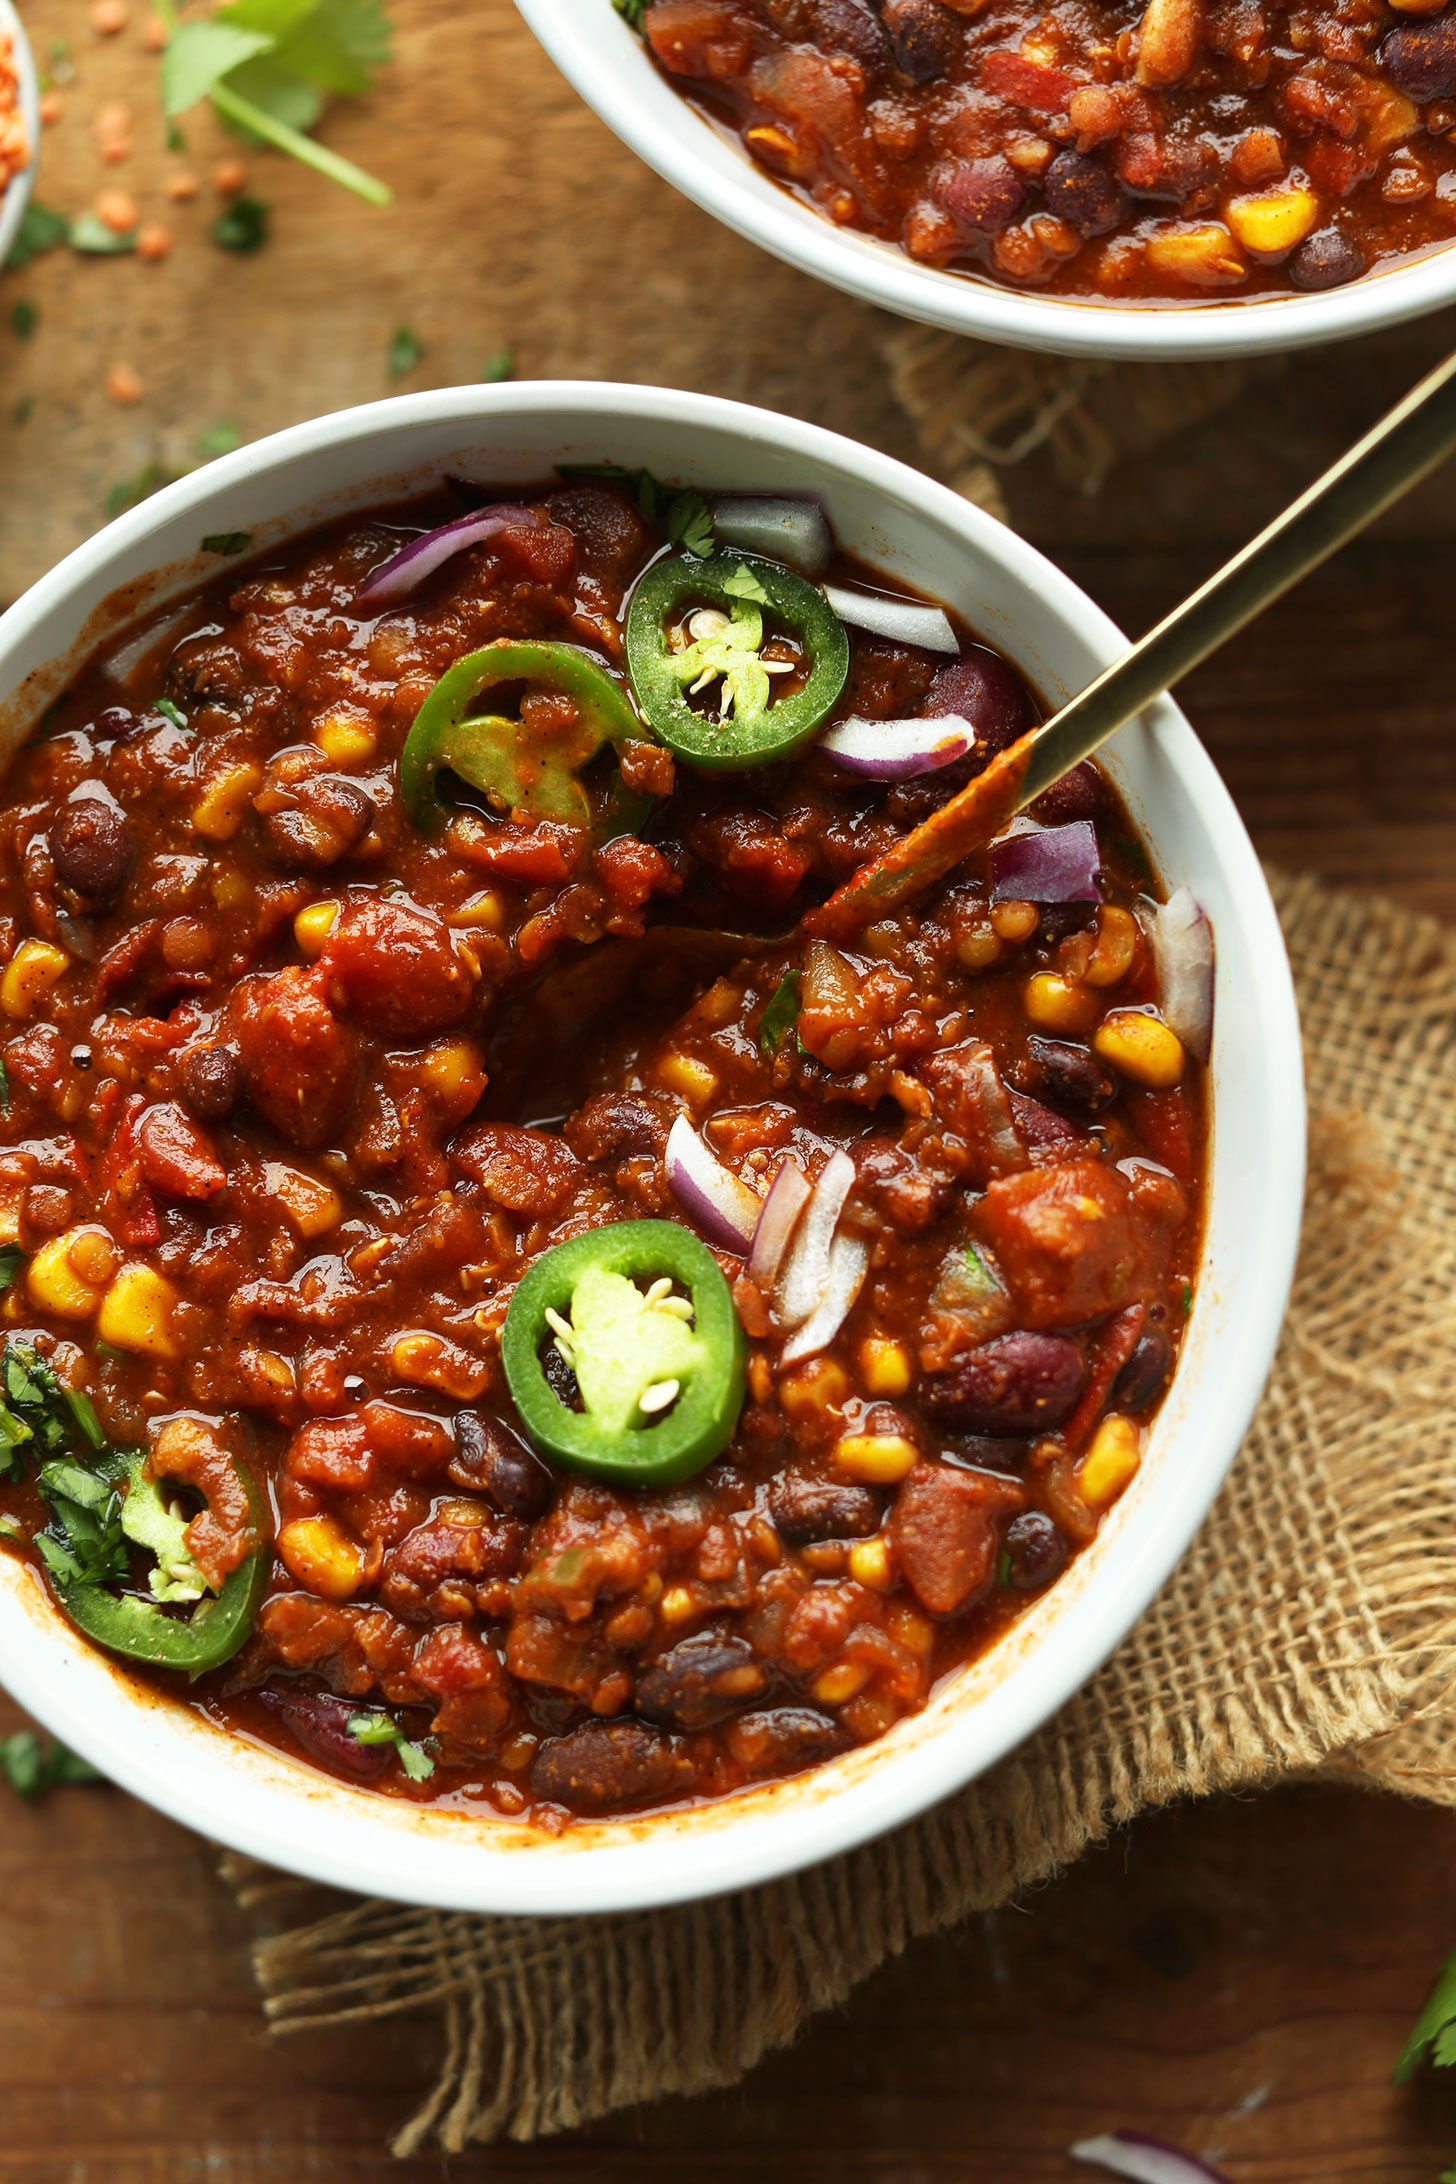 Bowl of our hearty, filling Red Lentil and Black Bean Chili topped with jalapenos